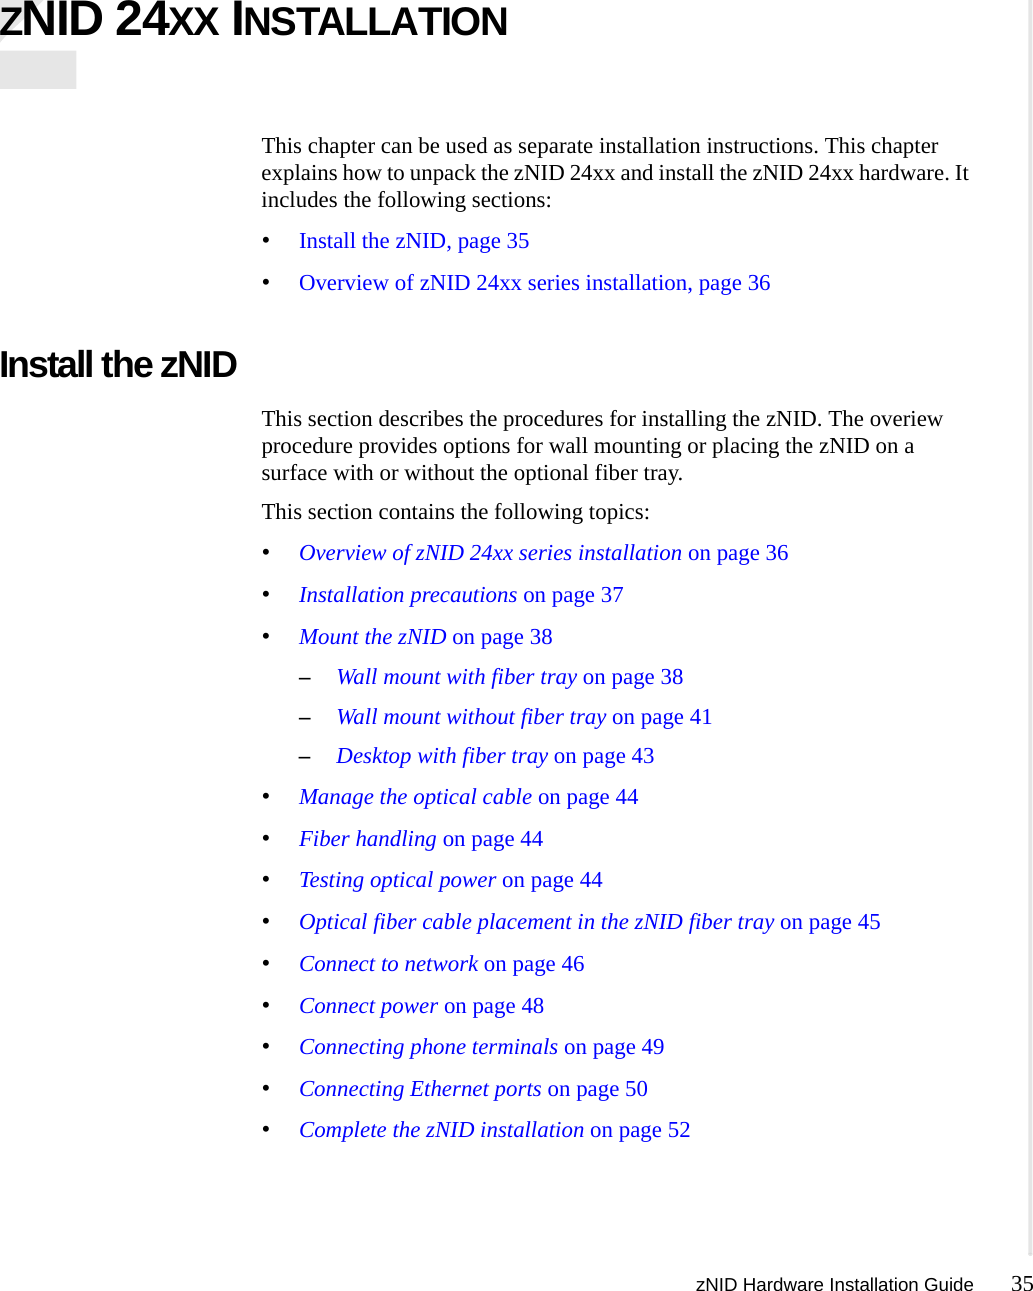 zNID Hardware Installation Guide 35  ZNID 24XX INSTALLATIONThis chapter can be used as separate installation instructions. This chapter explains how to unpack the zNID 24xx and install the zNID 24xx hardware. It includes the following sections:•Install the zNID, page 35•Overview of zNID 24xx series installation, page 36Install the zNIDThis section describes the procedures for installing the zNID. The overiew procedure provides options for wall mounting or placing the zNID on a surface with or without the optional fiber tray.This section contains the following topics:•Overview of zNID 24xx series installation on page 36•Installation precautions on page 37•Mount the zNID on page 38–Wall mount with fiber tray on page 38–Wall mount without fiber tray on page 41–Desktop with fiber tray on page 43•Manage the optical cable on page 44•Fiber handling on page 44•Testing optical power on page 44•Optical fiber cable placement in the zNID fiber tray on page 45•Connect to network on page 46•Connect power on page 48•Connecting phone terminals on page 49•Connecting Ethernet ports on page 50•Complete the zNID installation on page 52